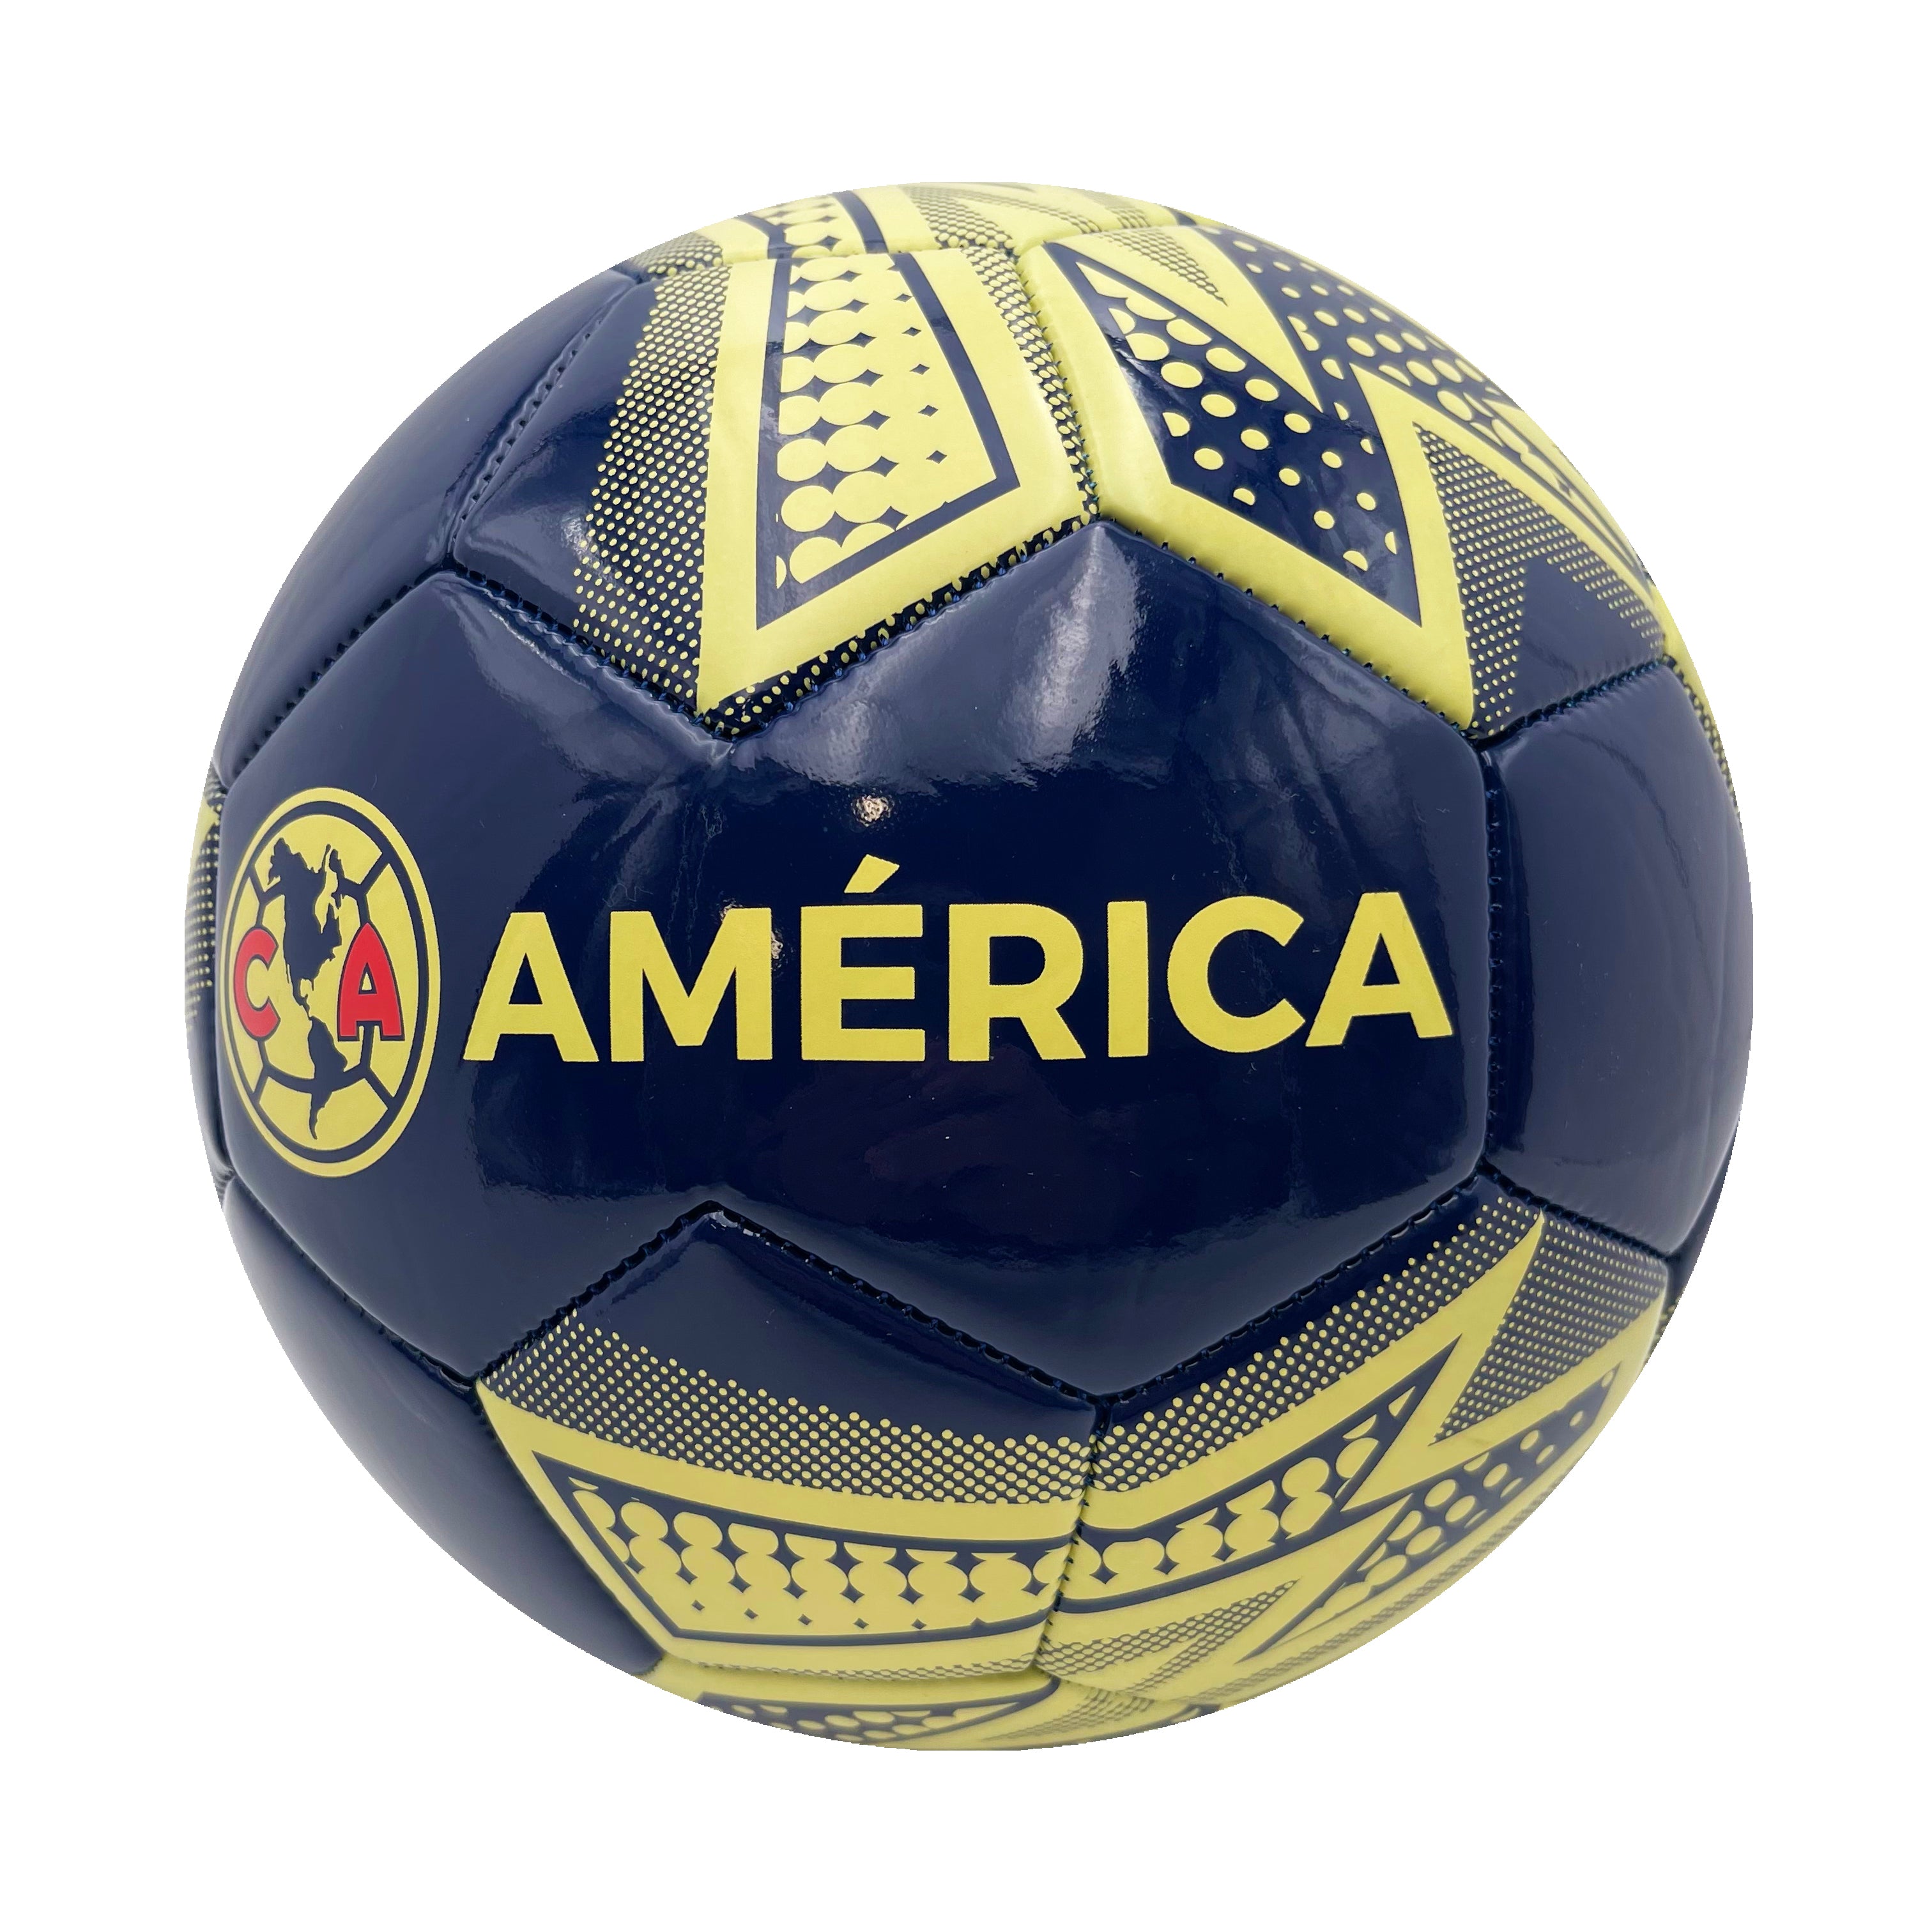 Club America Regulation Size 5 Soccer Ball by Icon Sports